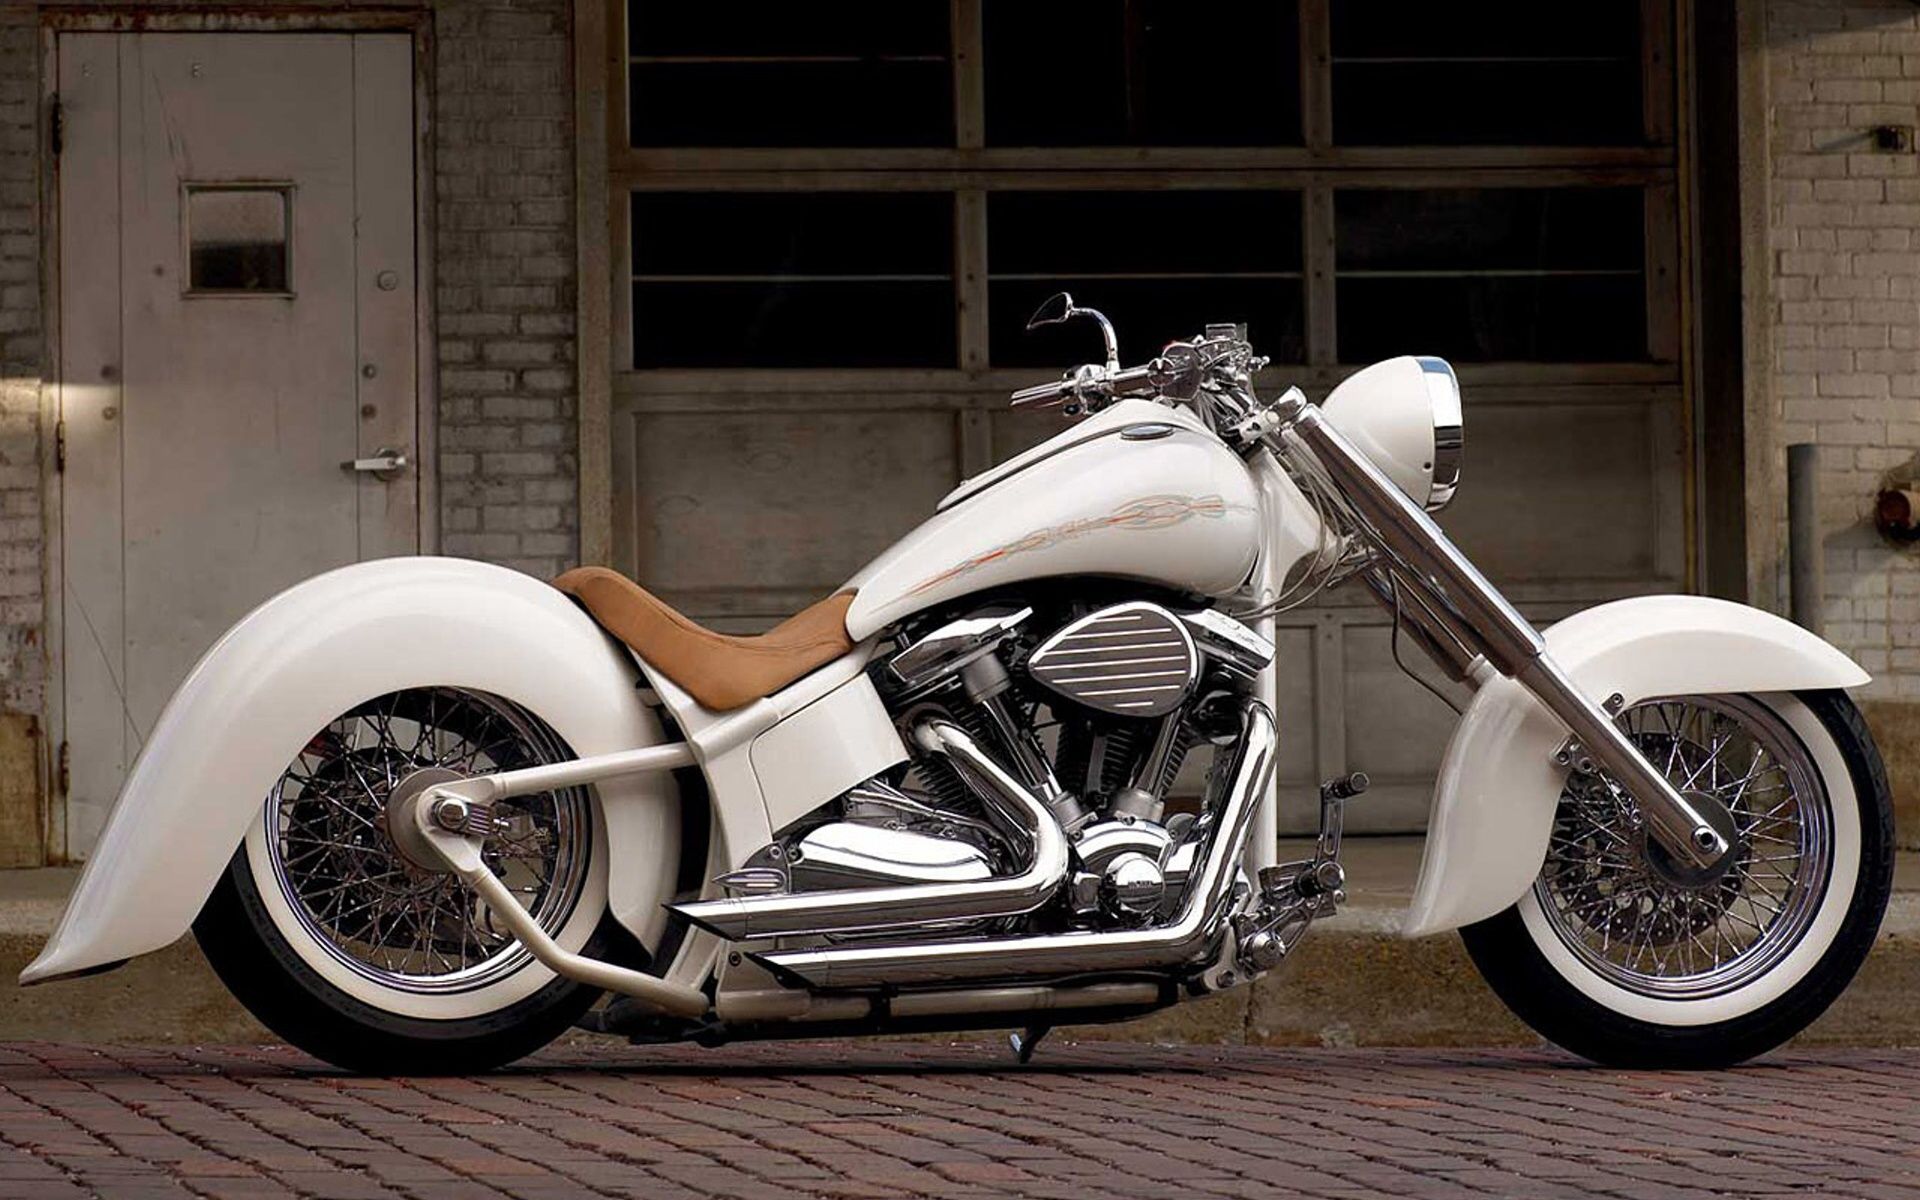 Retro motorcycle design wallpaper and image, picture, photo